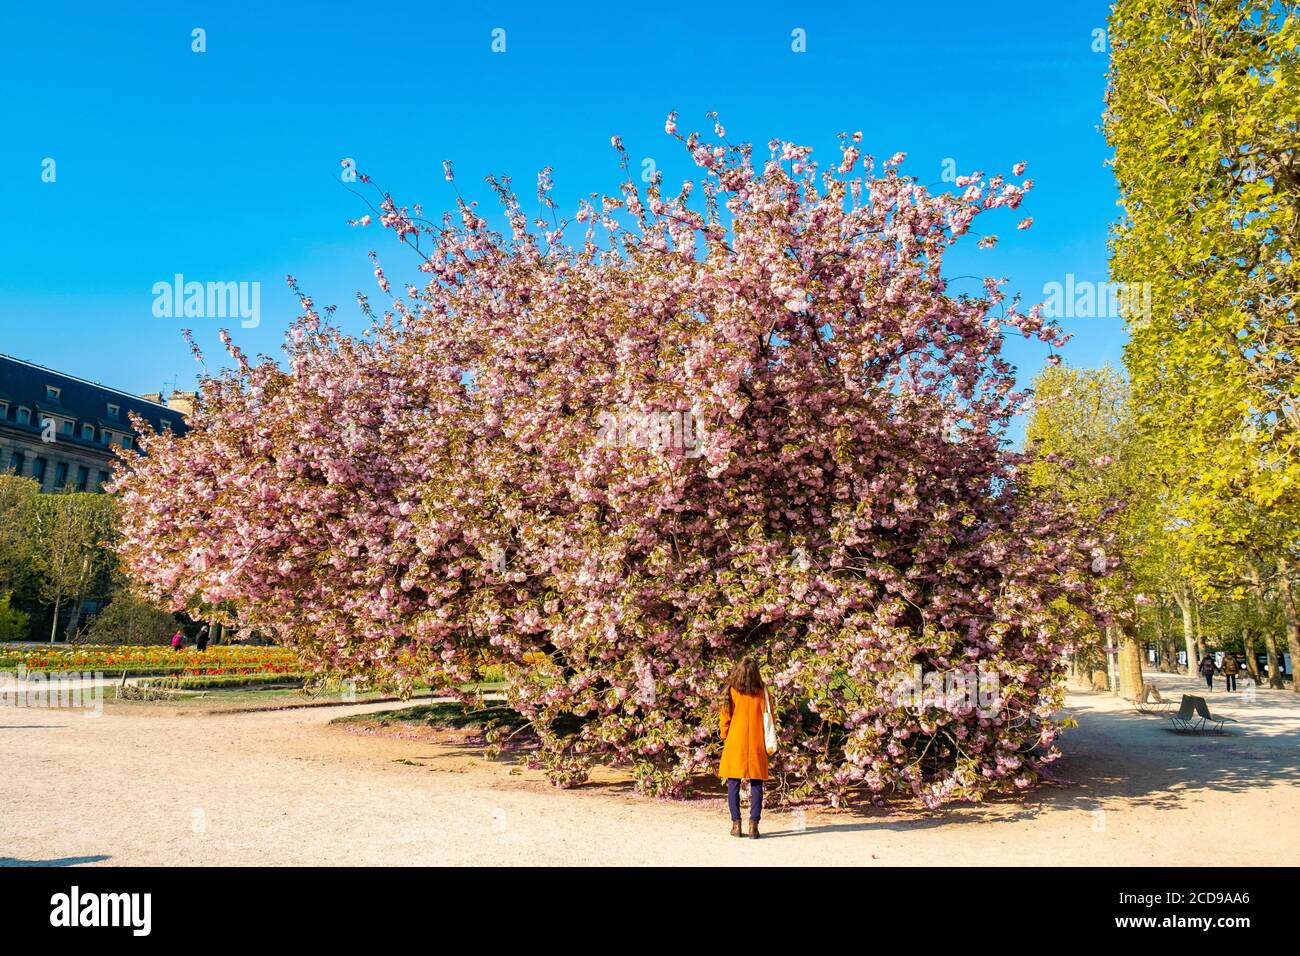 France, Paris, the Garden of Plants with in the foreground a Japanese cherry blossom (Prunus serrulata) Stock Photo